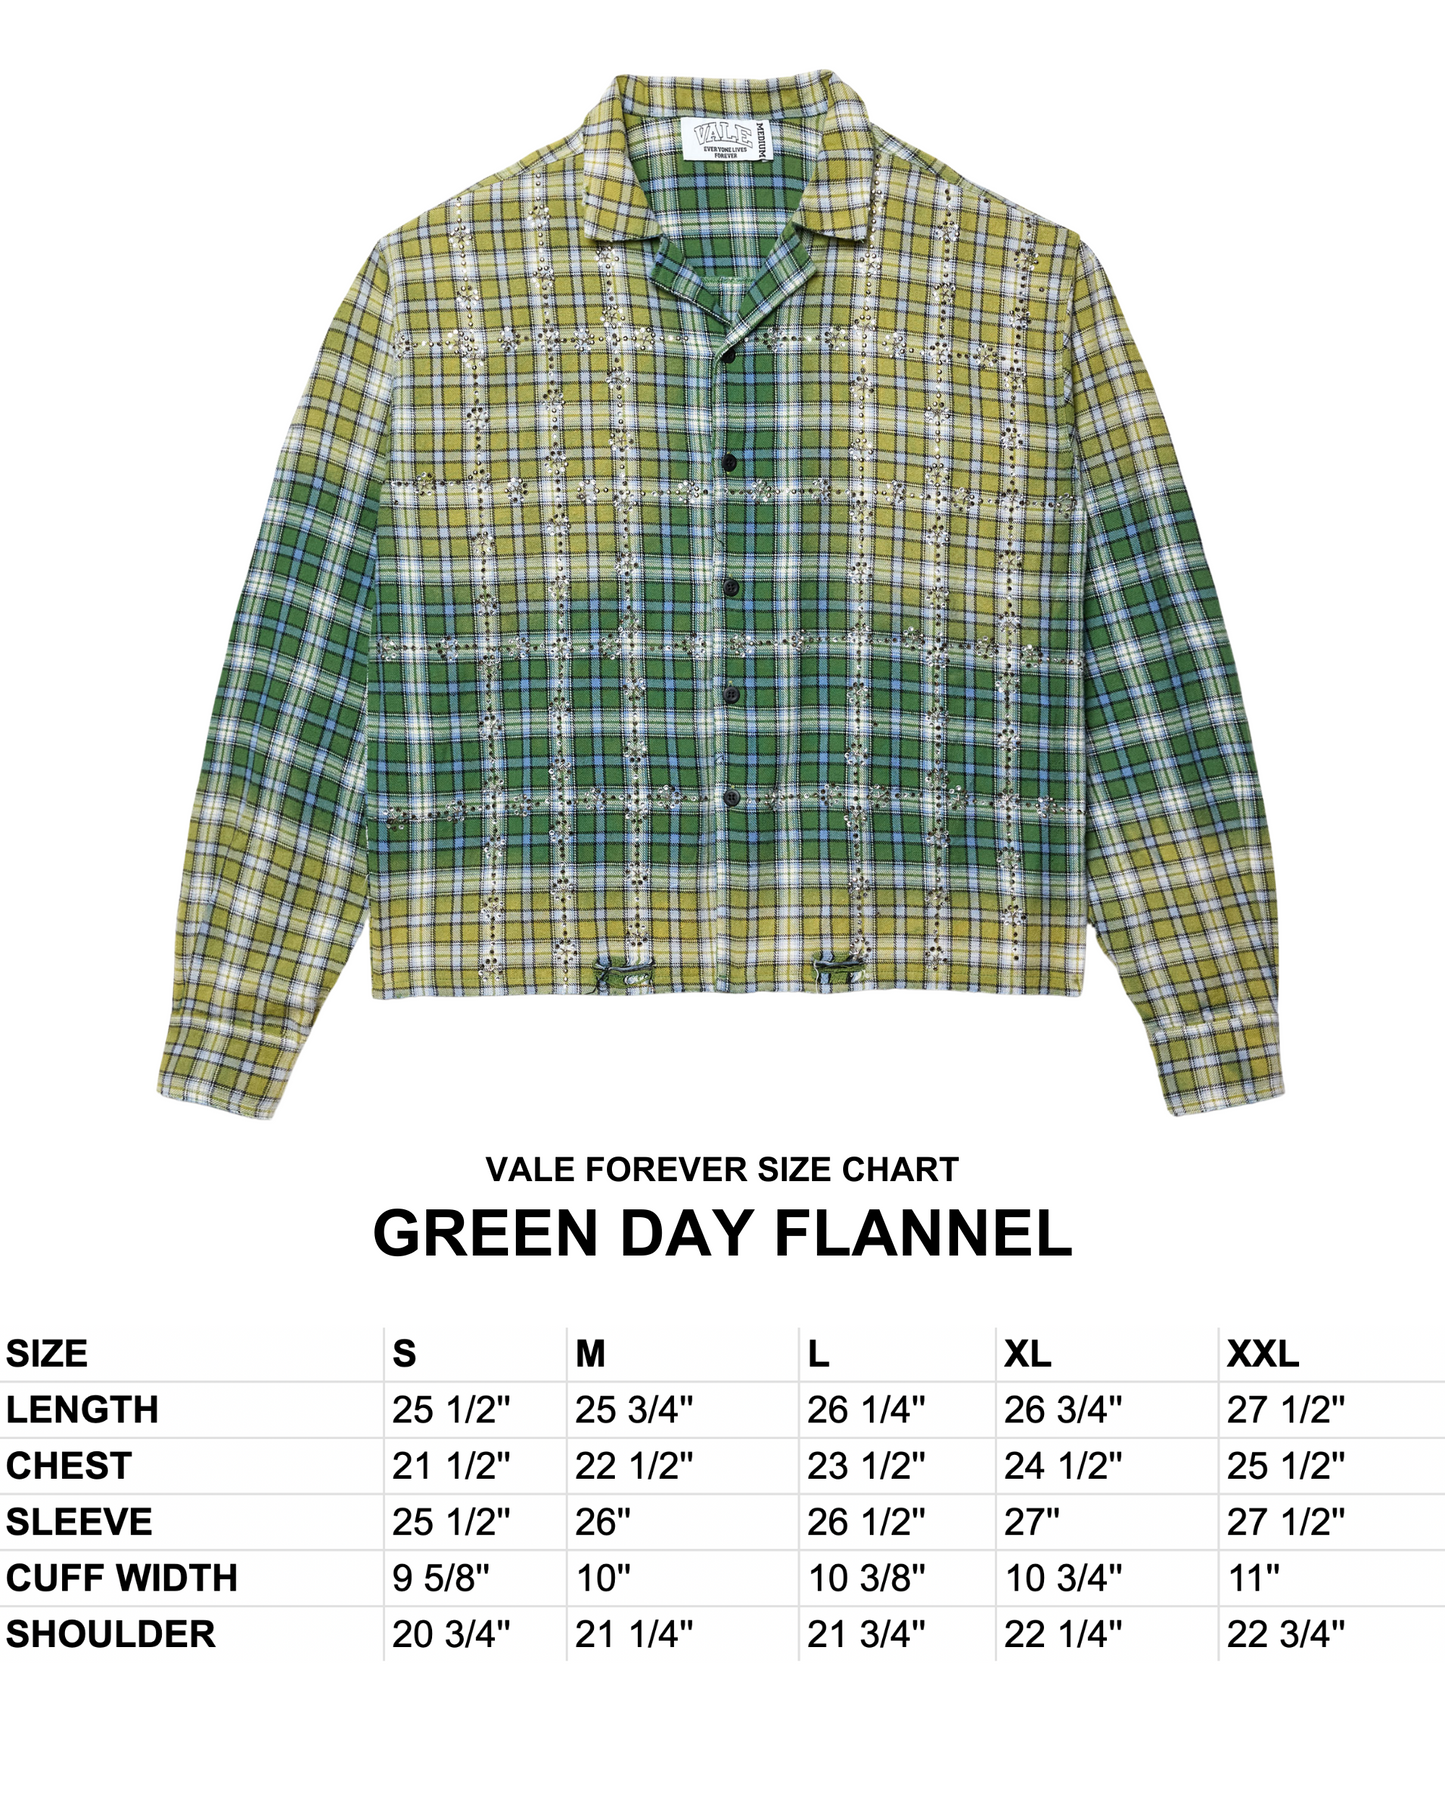 GREEN DAY FLANNEL